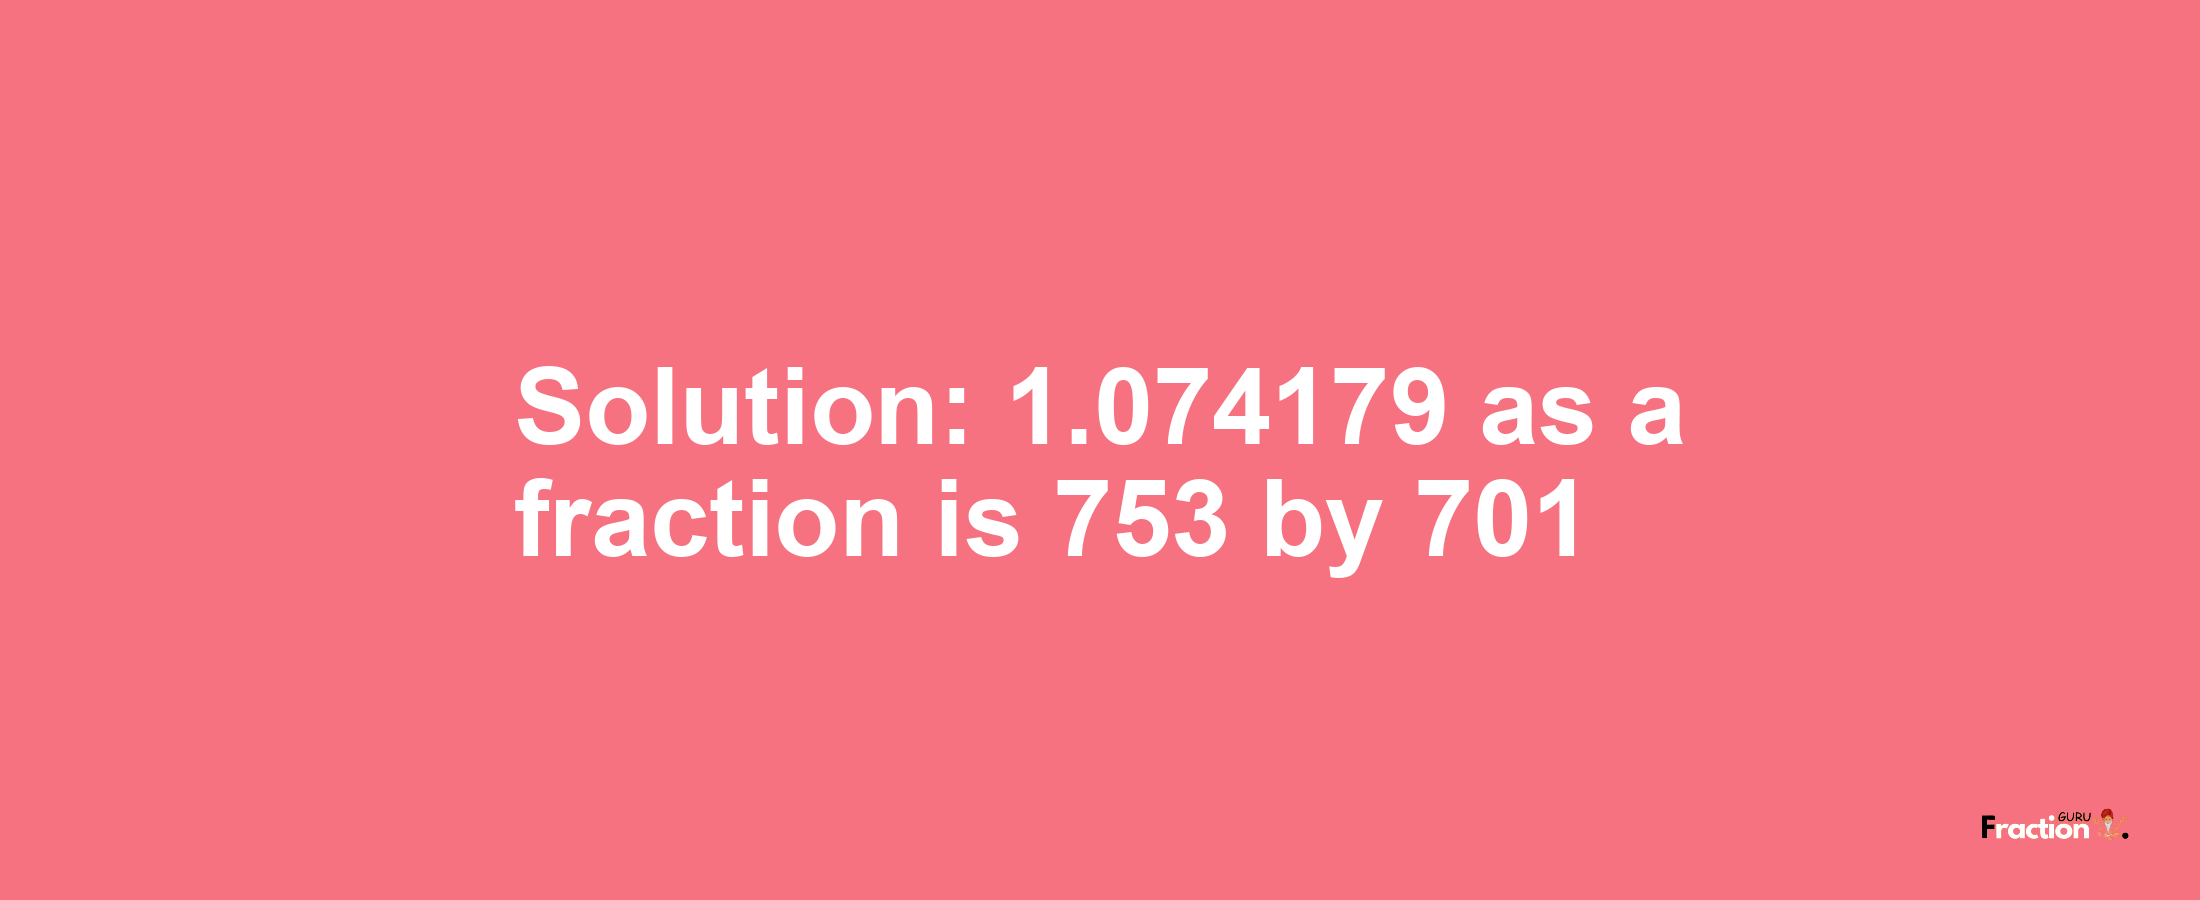 Solution:1.074179 as a fraction is 753/701